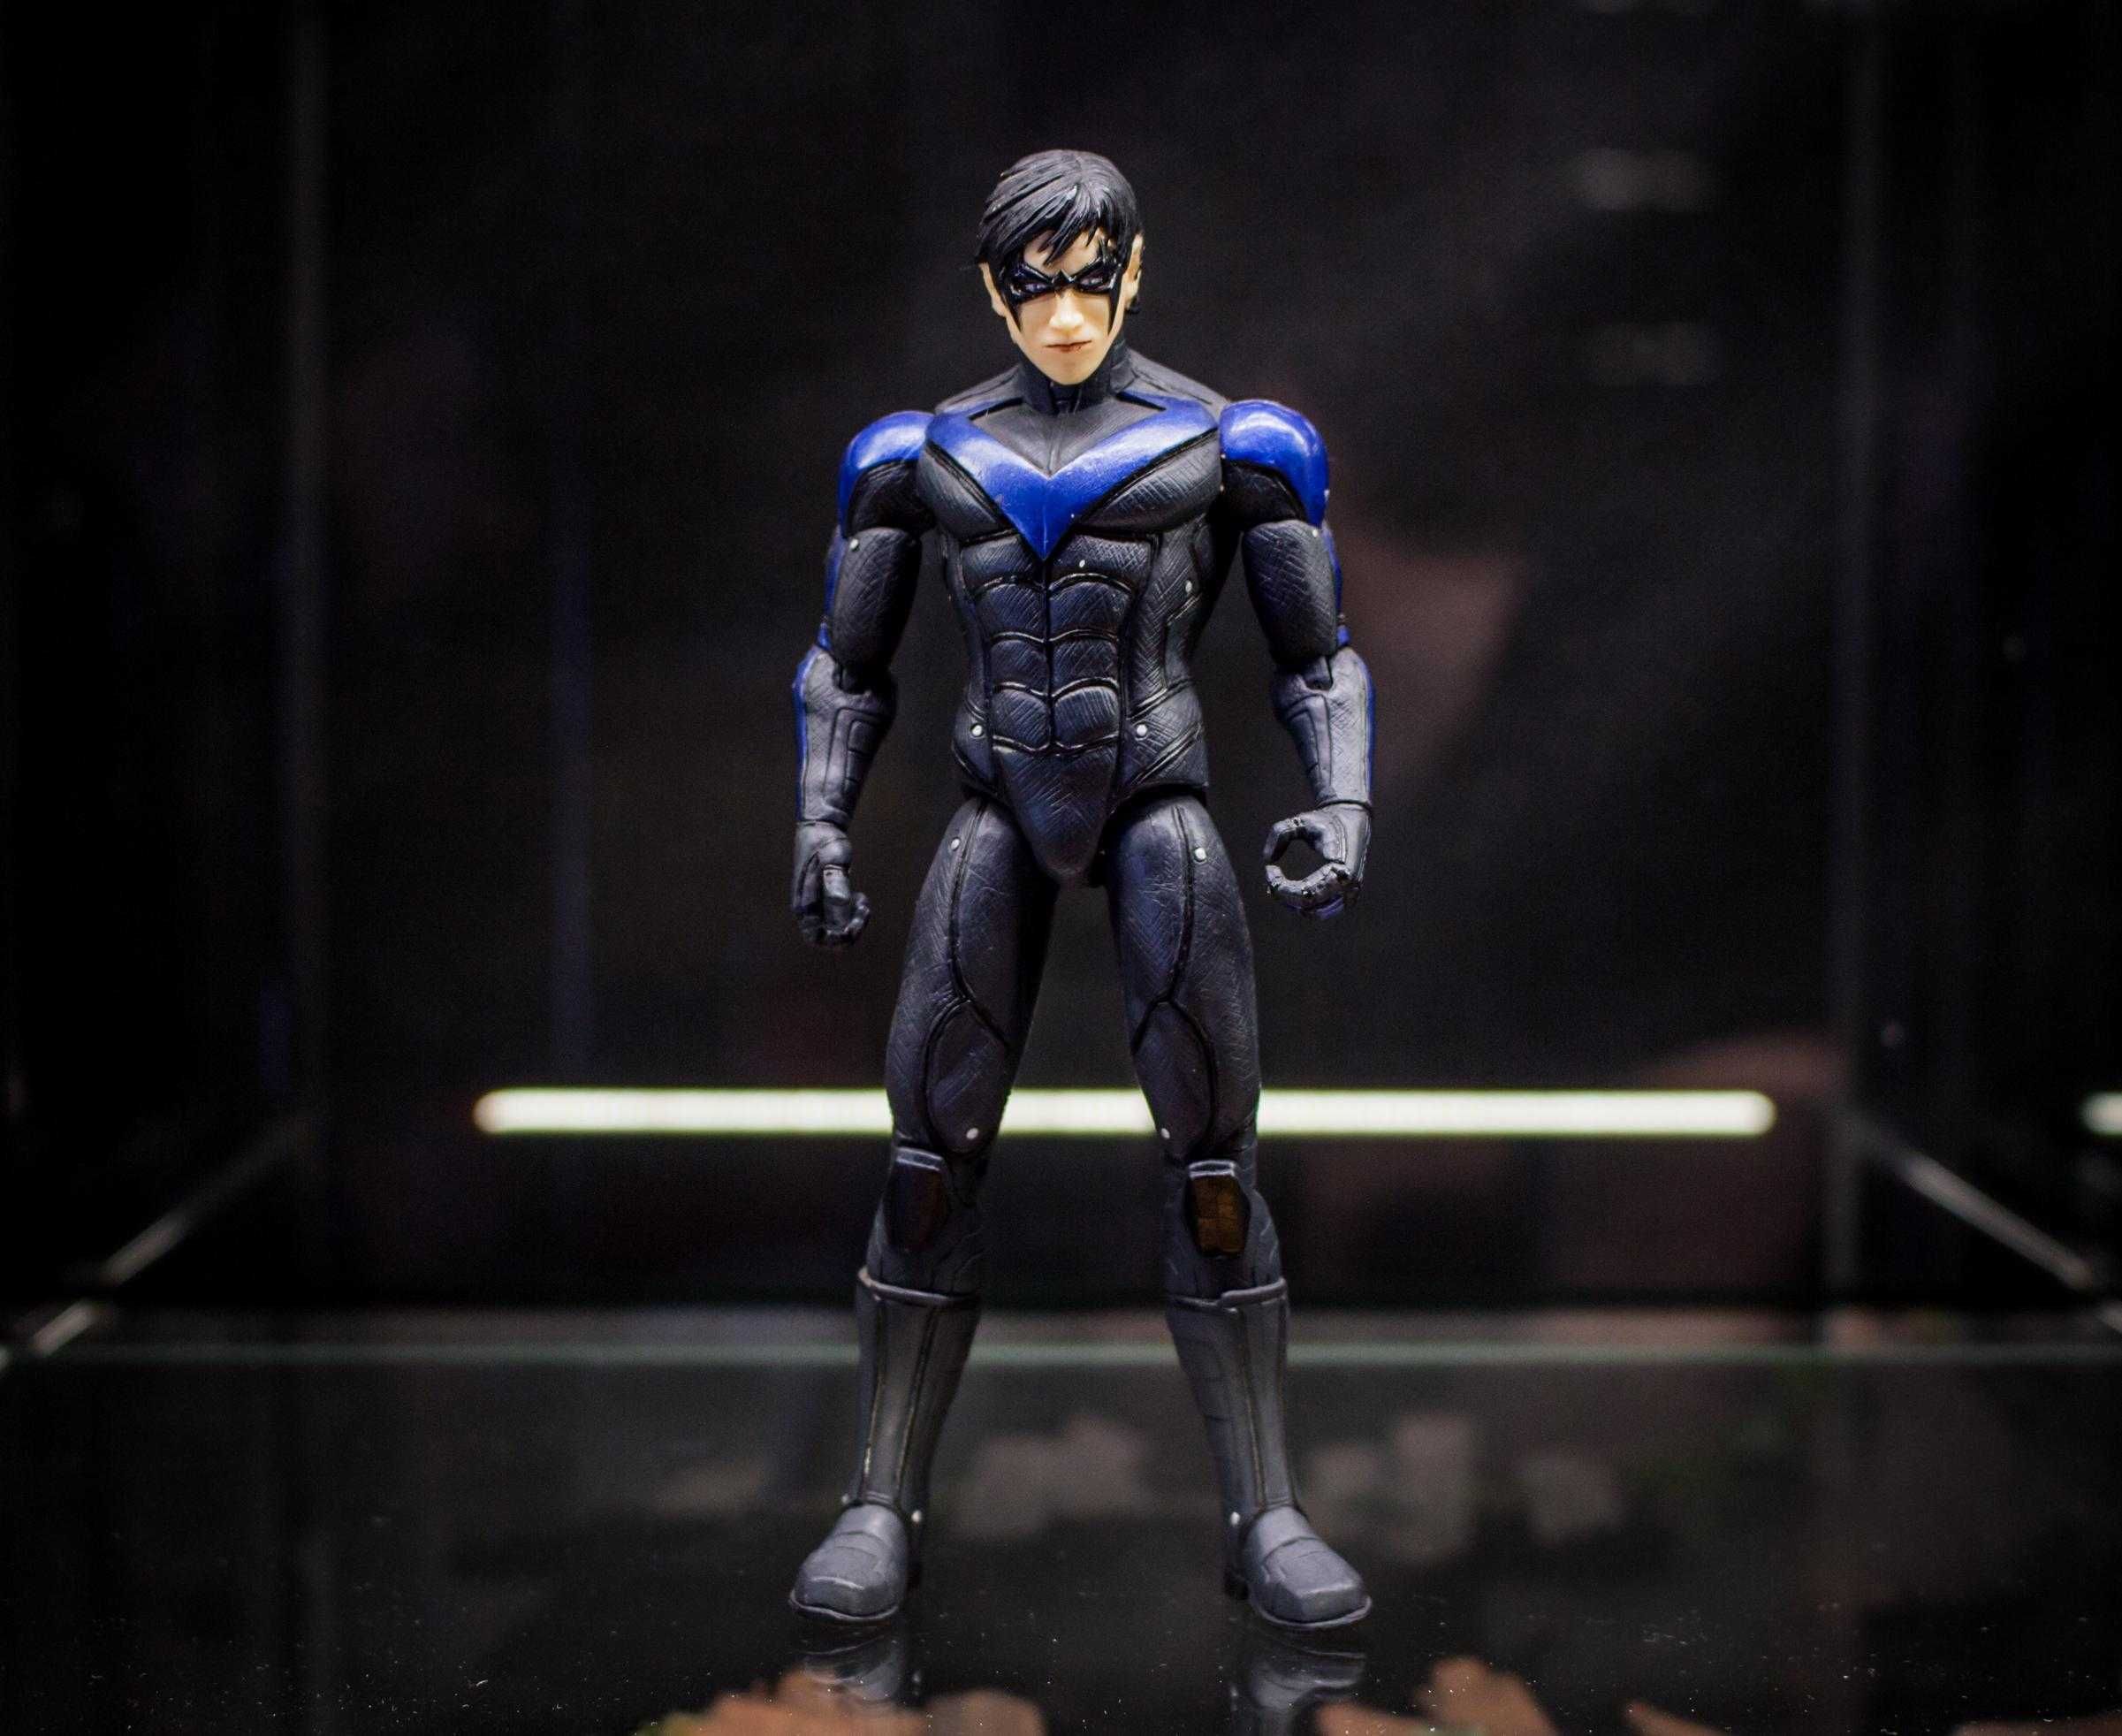 Figurka Nightwing Arkham City DC Collectibles